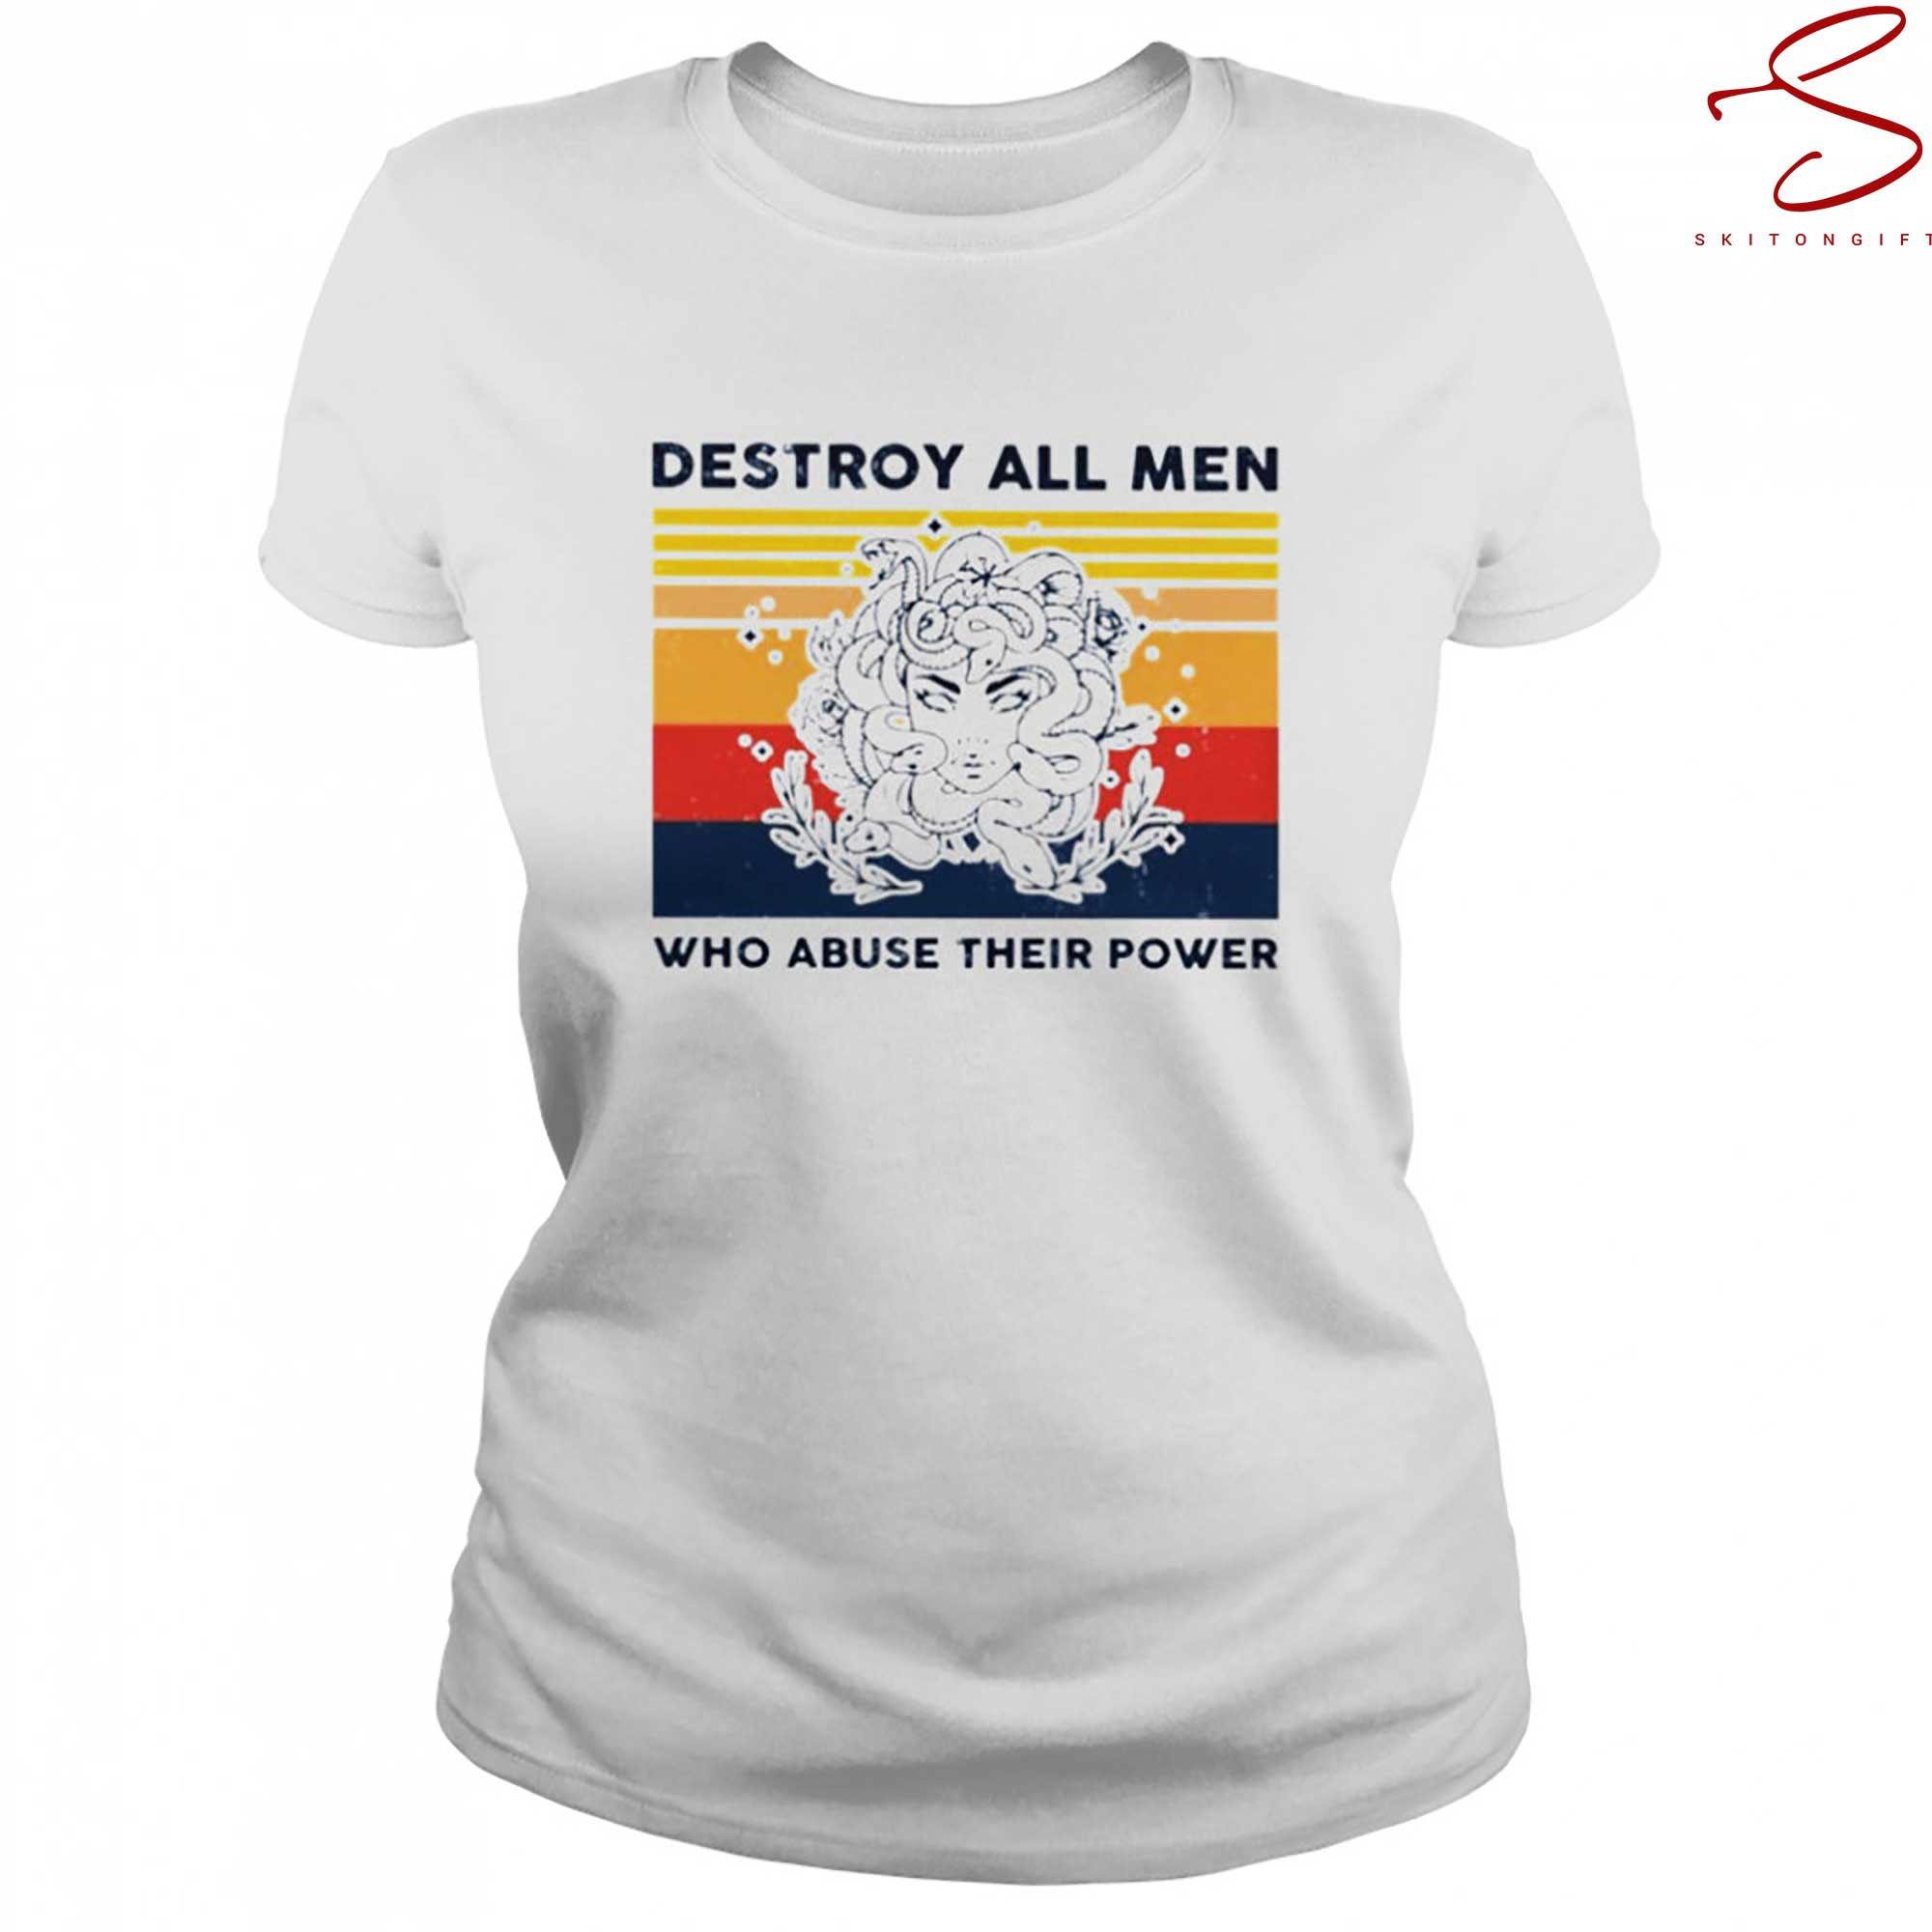 Skitongift Destroy All Men Who Abuse Their Power Vintage T Shirt